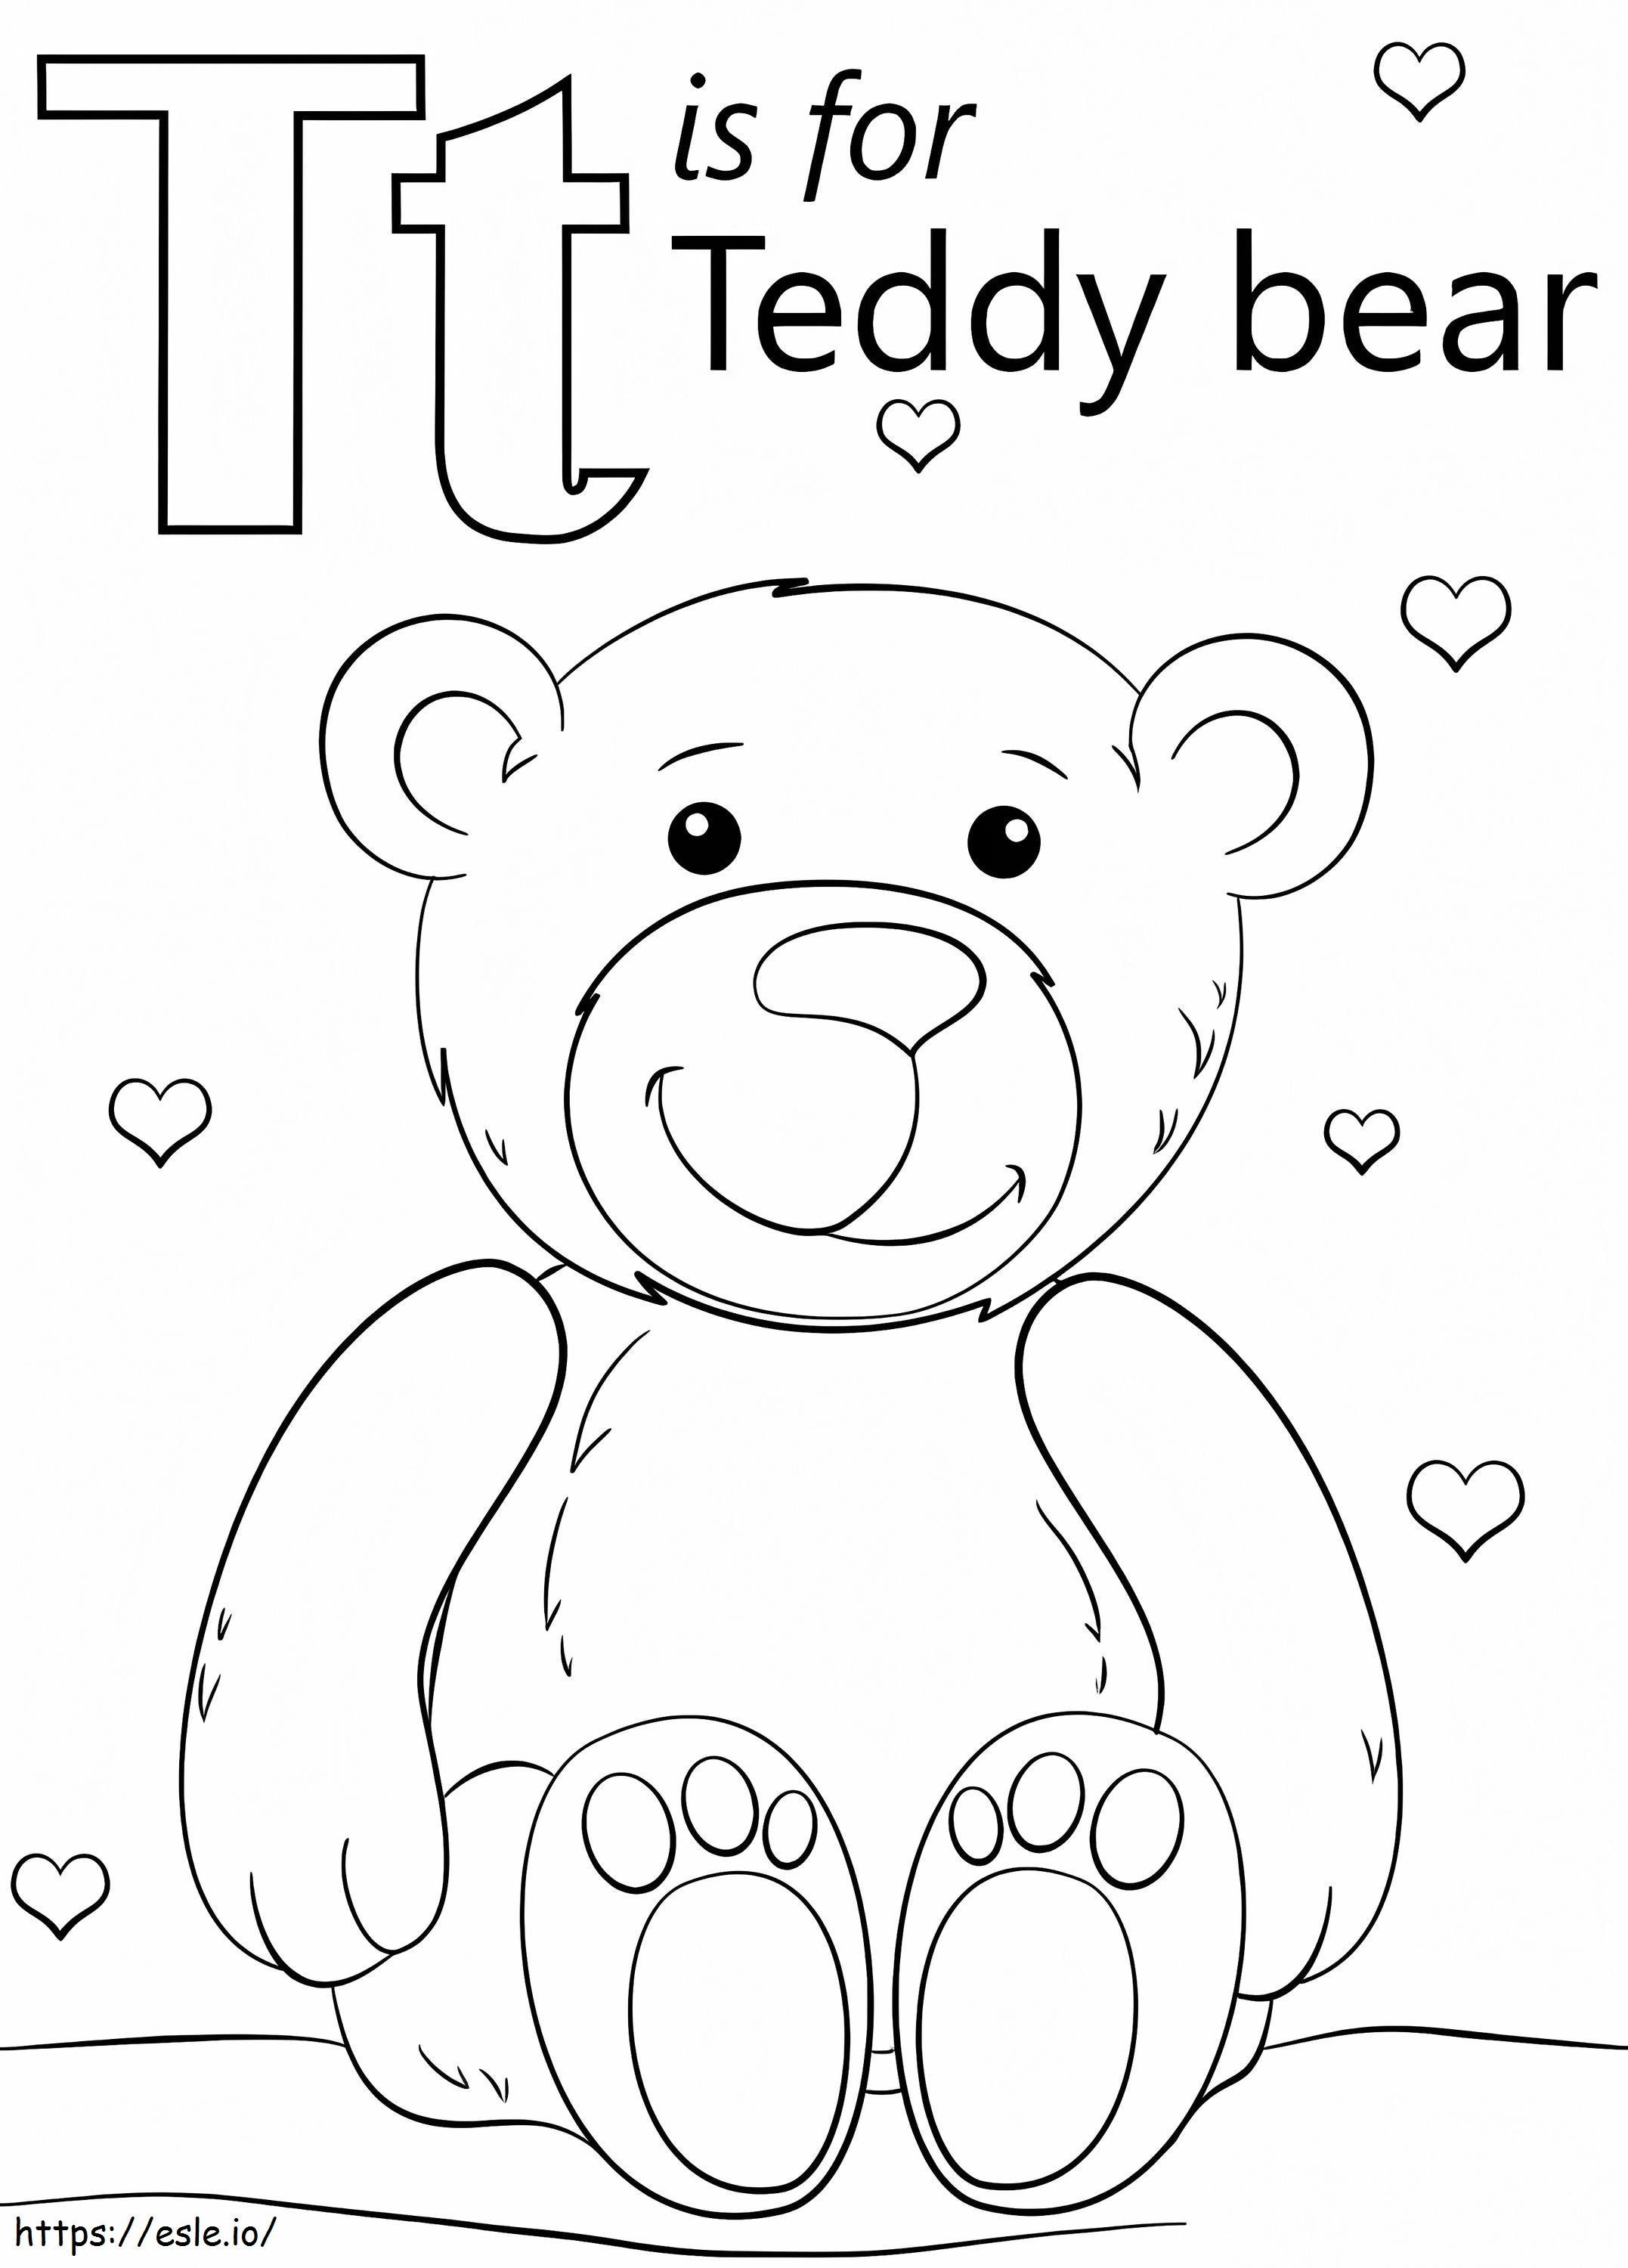 Teddy Bear Letter T coloring page